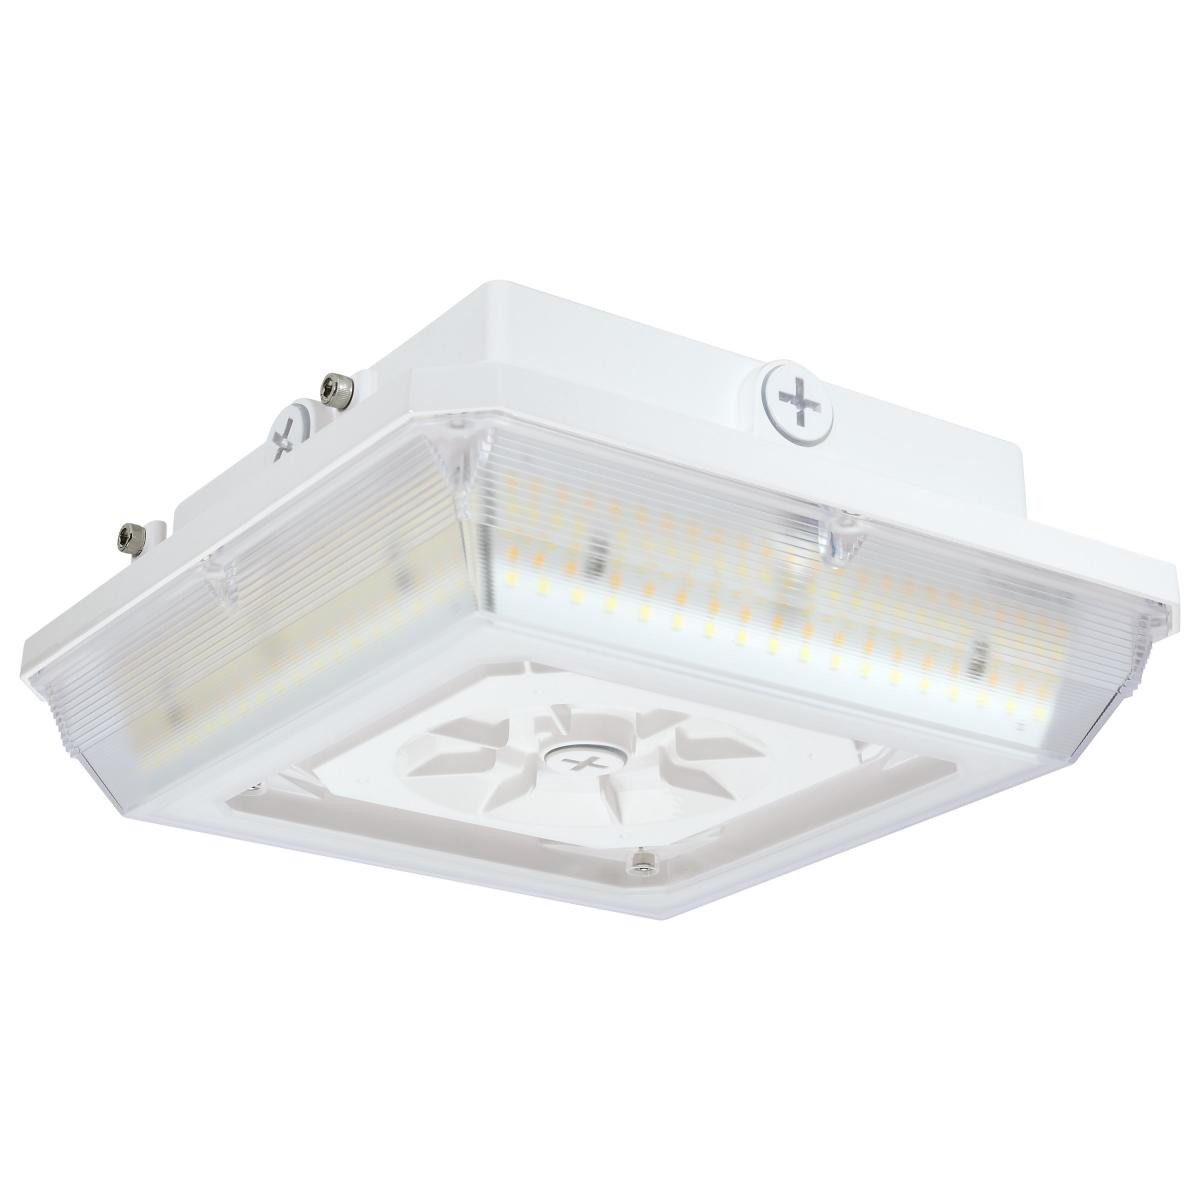 LED Wide Beam Canopy Light - Multi Watt Selectable 45/30/20W - 6288 Max Lumens - 120-277V - Color Temperature Selectable 30K/40K/50K - White Finish With Emergency Battery Back-Up